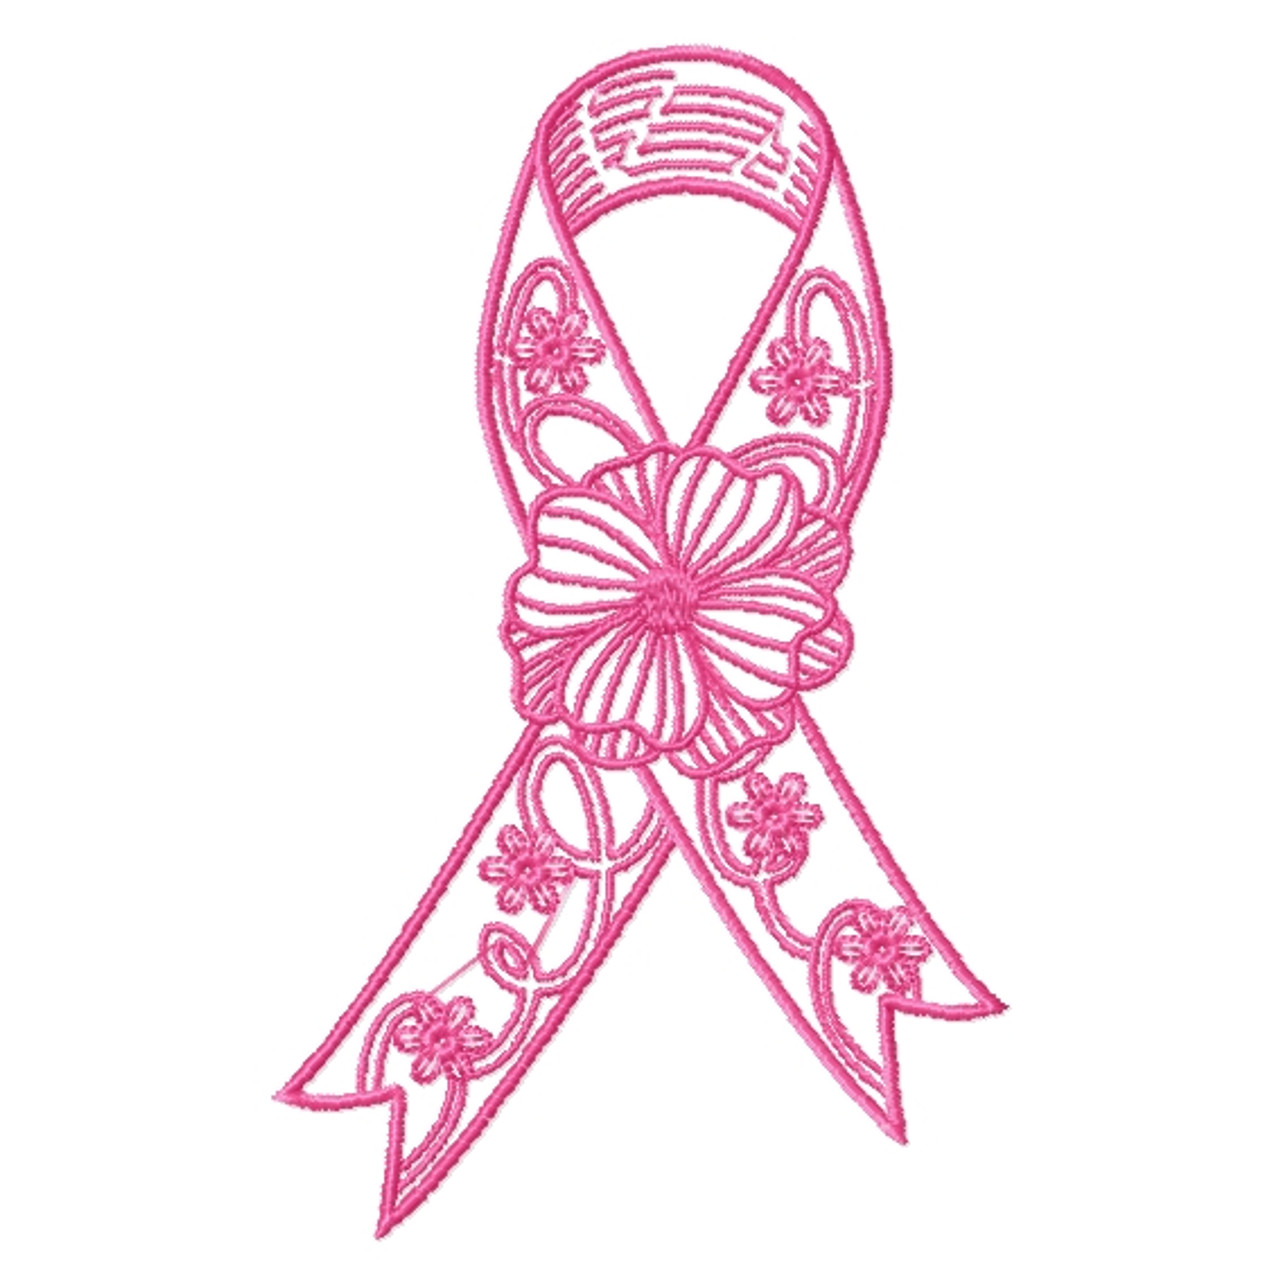 Pink Ribbon Embroidery Transfer Patterns